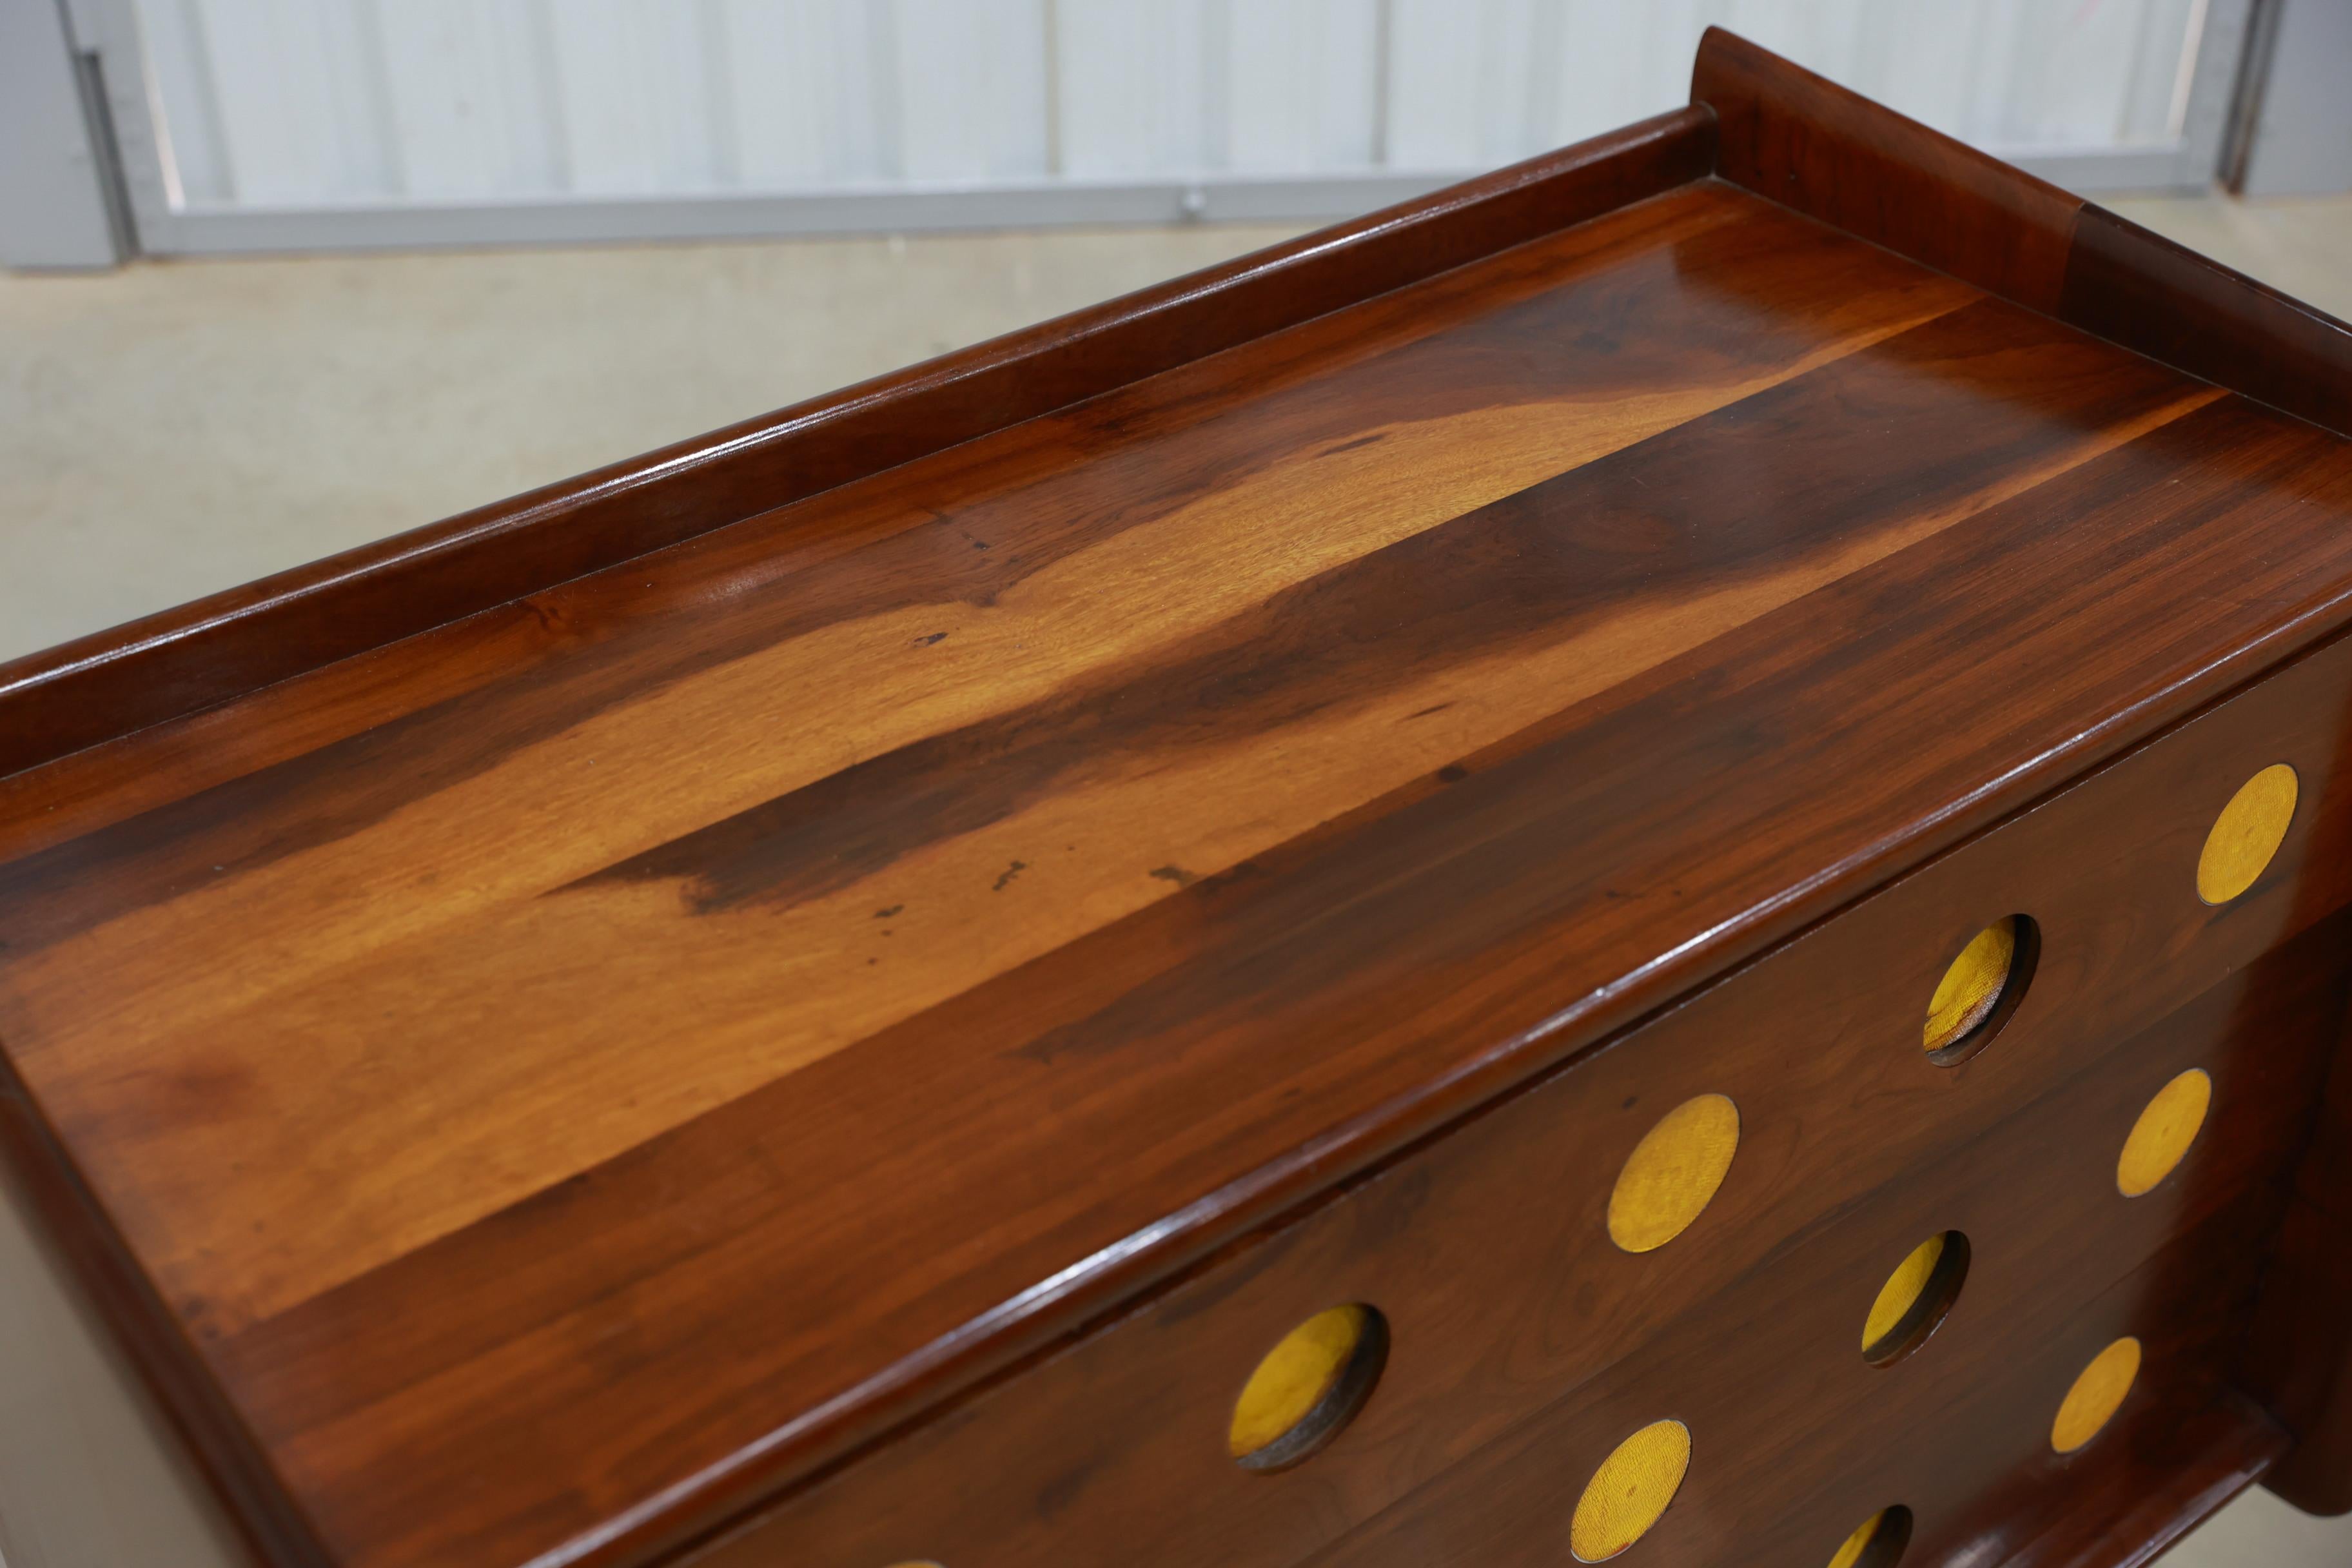 Hand-Carved Brazilian Modern Chest of Drawers in Hardwood by Moveis Cimo, 1950s, Brazil For Sale